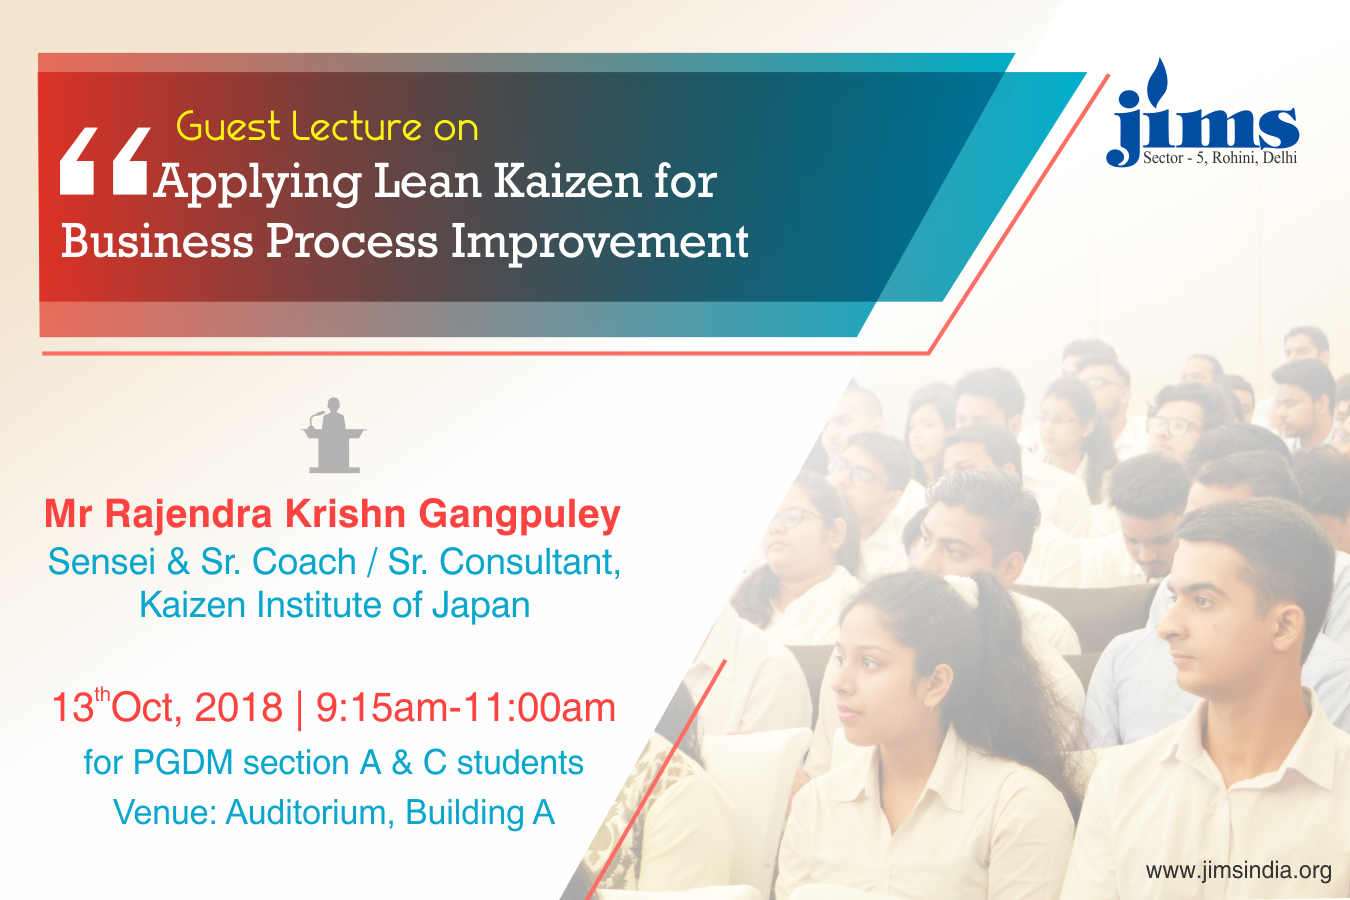 Guest Lecture onApplying Lean Kaizen for Business Process Improvement